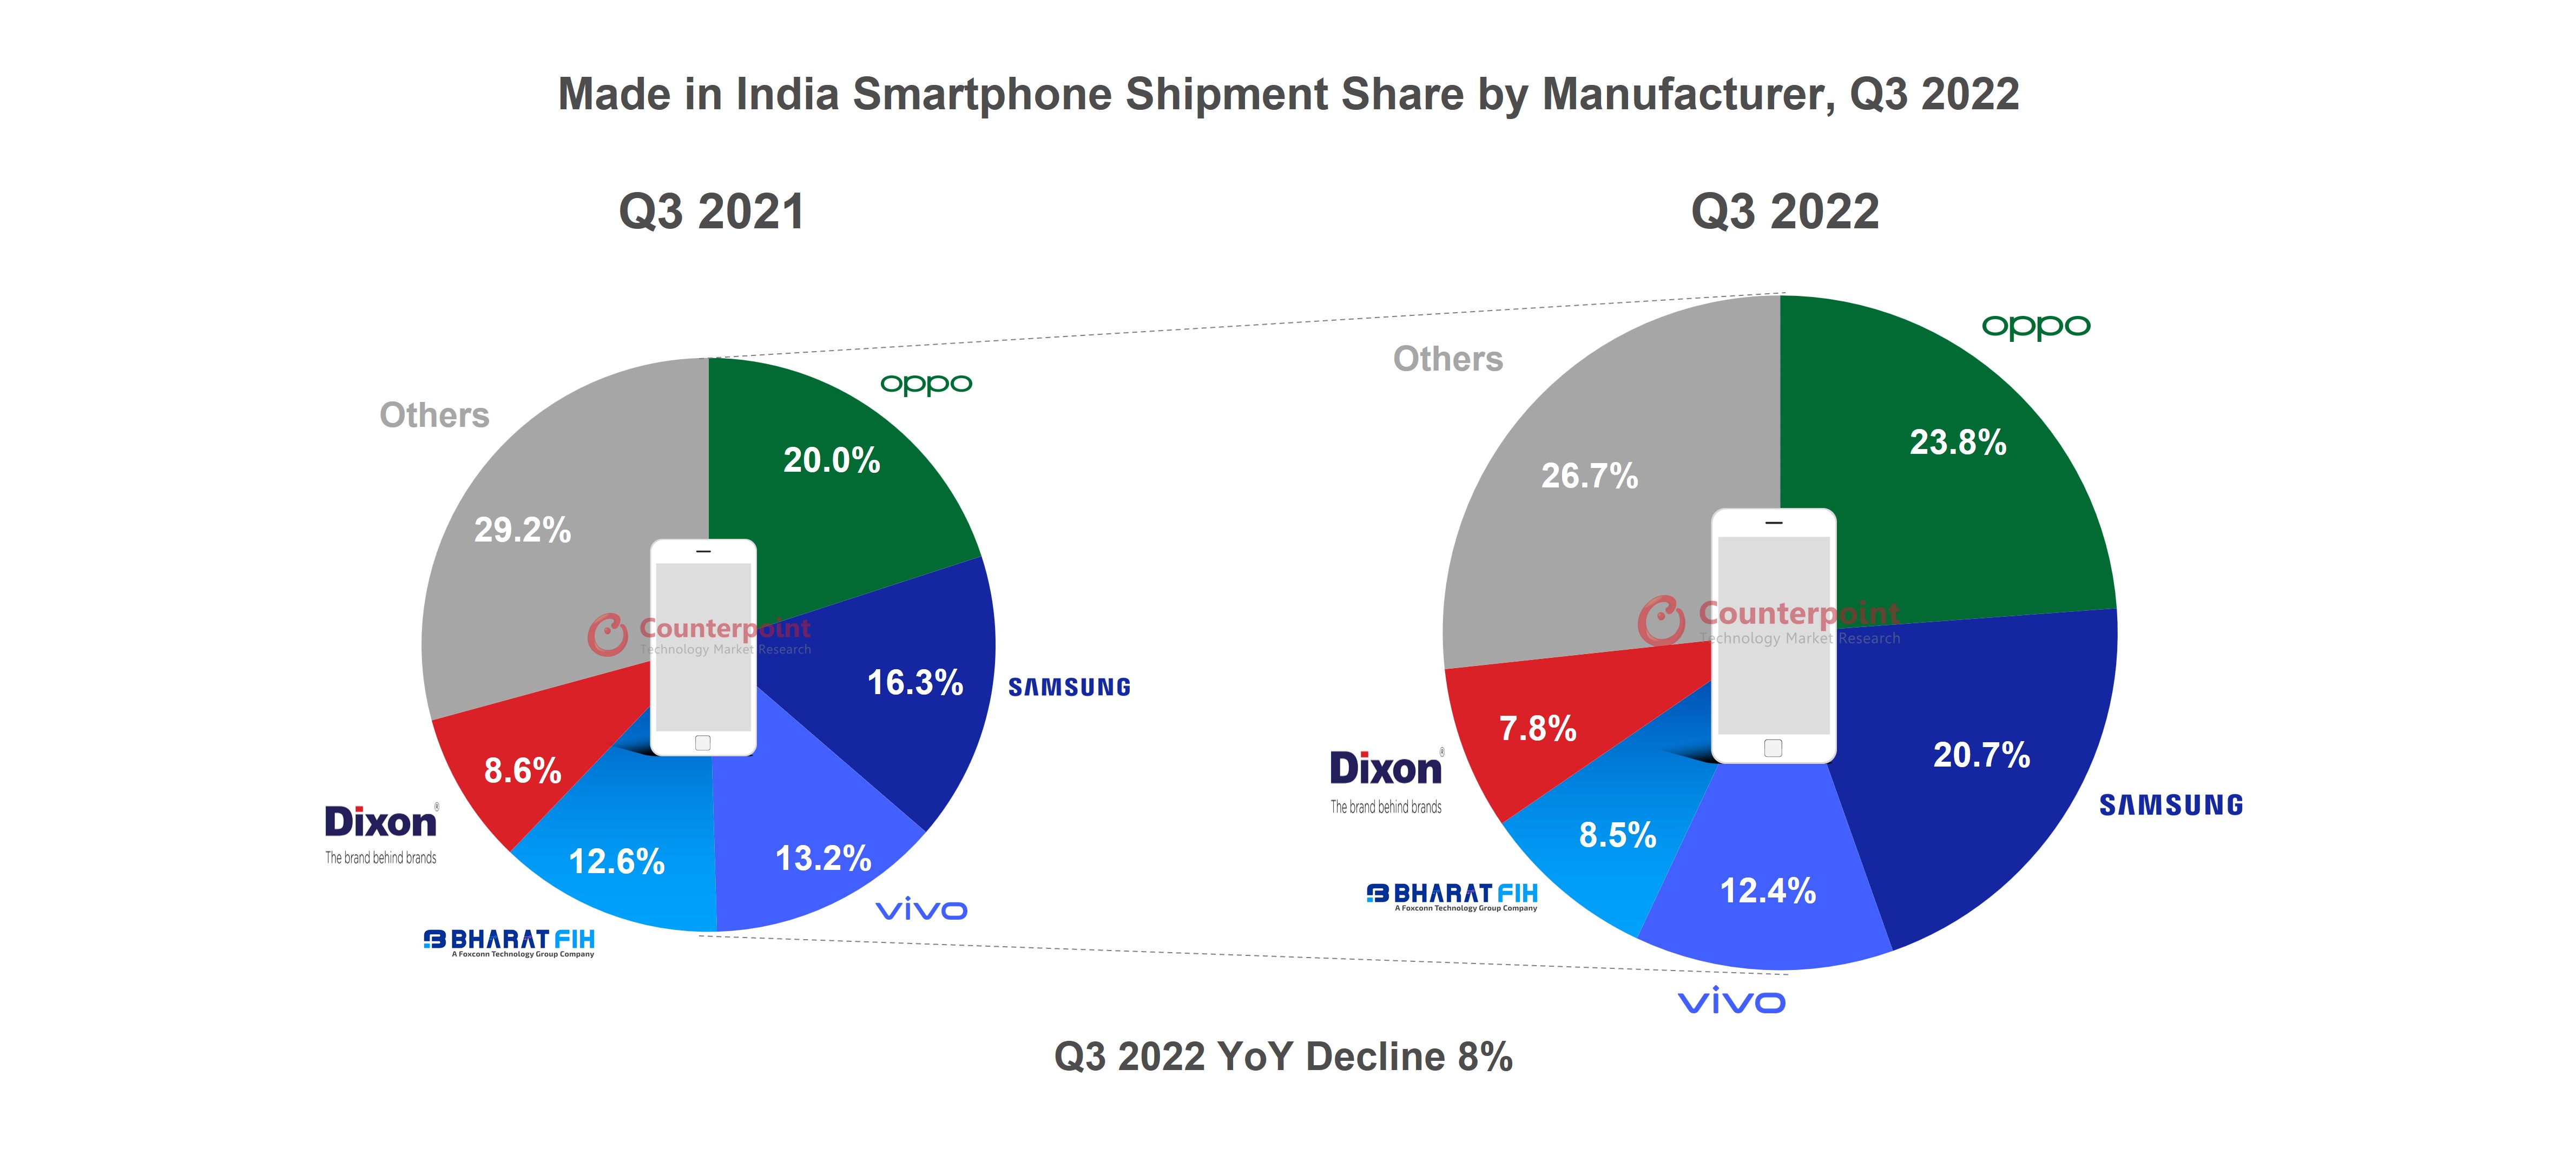 India Smartphone Shipment Share by Manufacturer Q3 2022